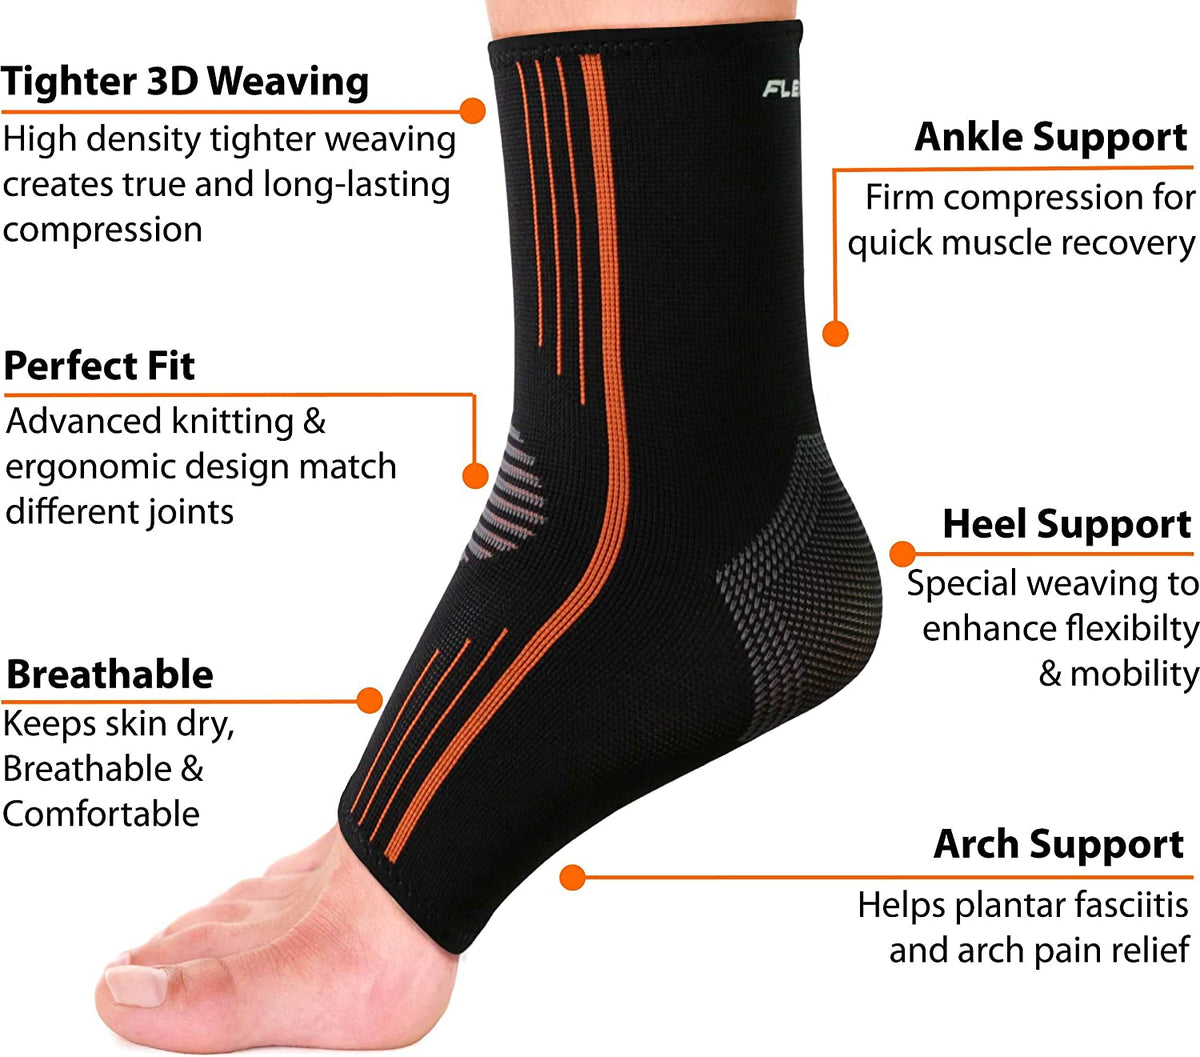 NeoAlly® Compression Ankle Sleeves - High Compression | Breathable, Long-Lasting Compression, Arch Support | NeoAllySports.com